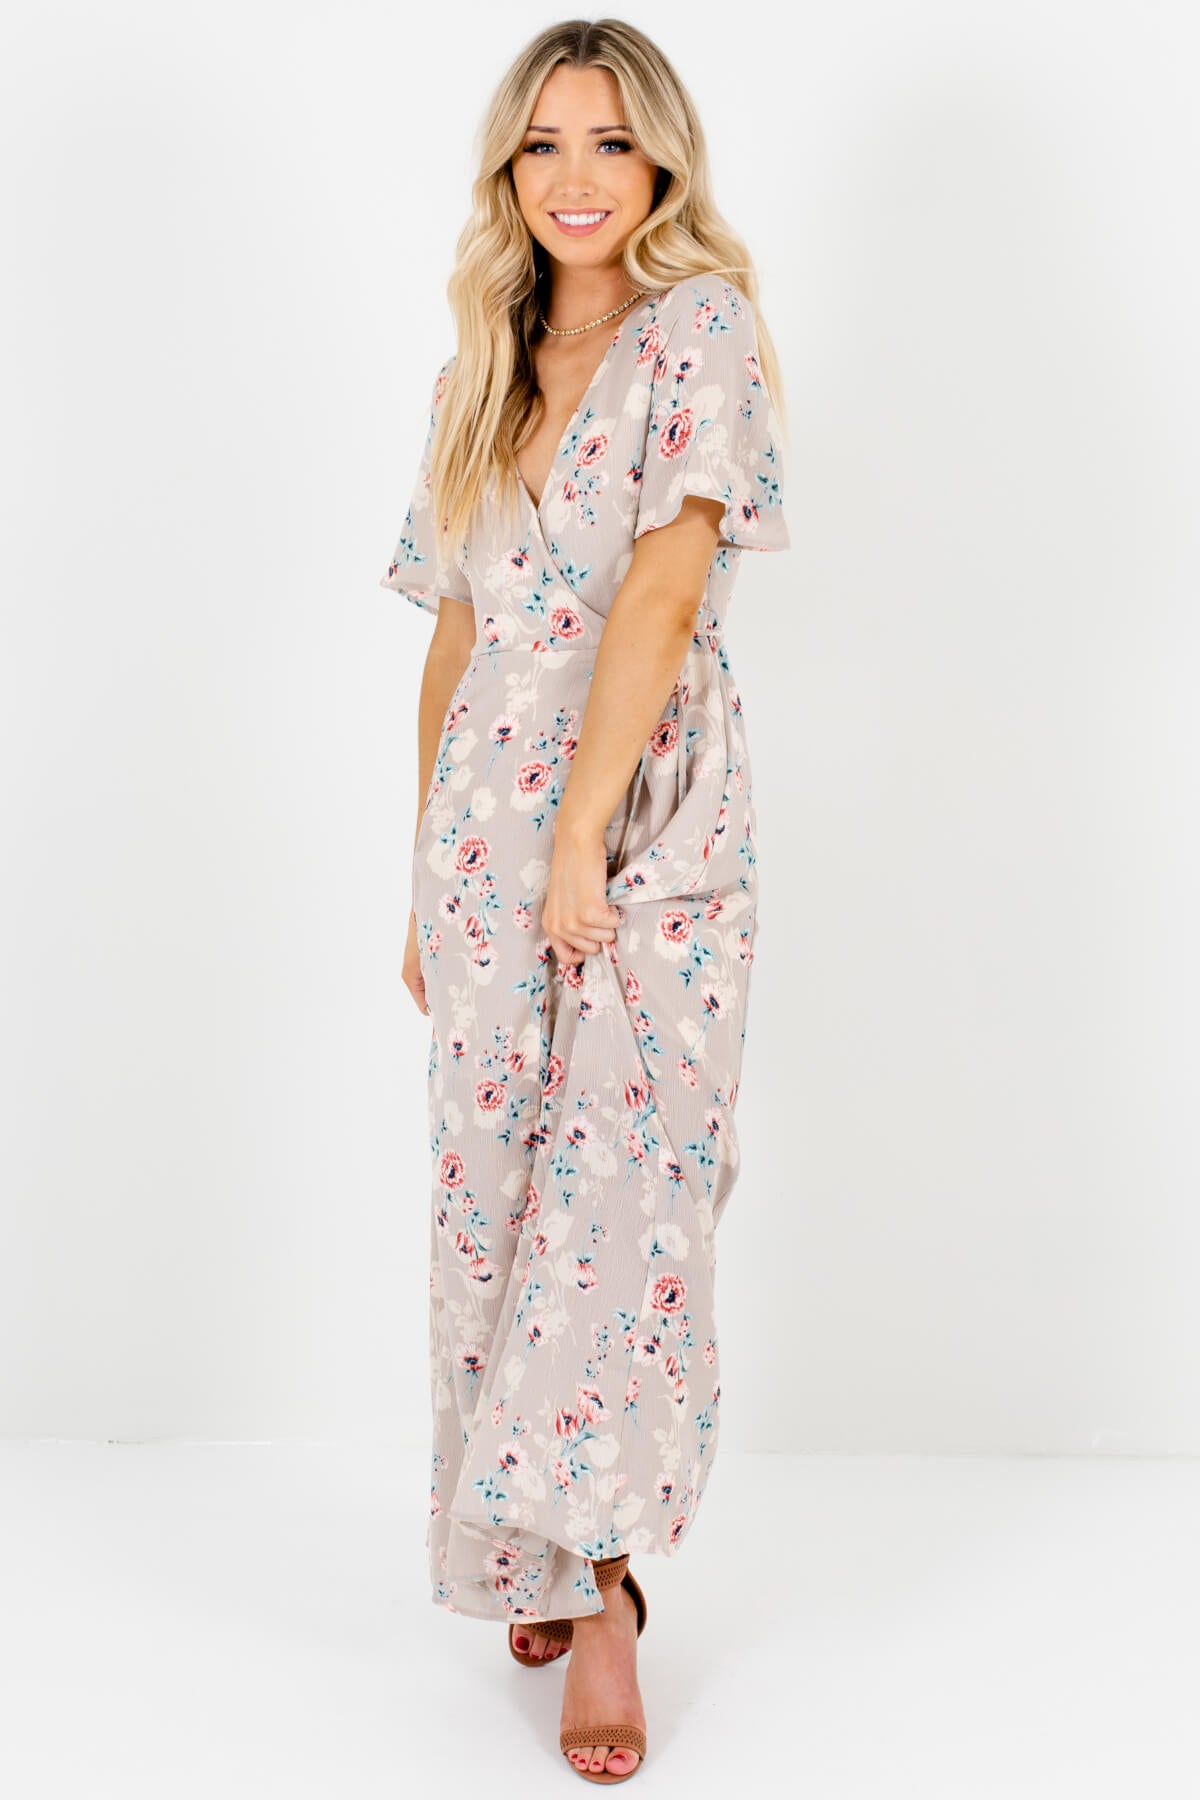 Gray Pink Teal Floral Print Wrap Maxi Dresses for Women